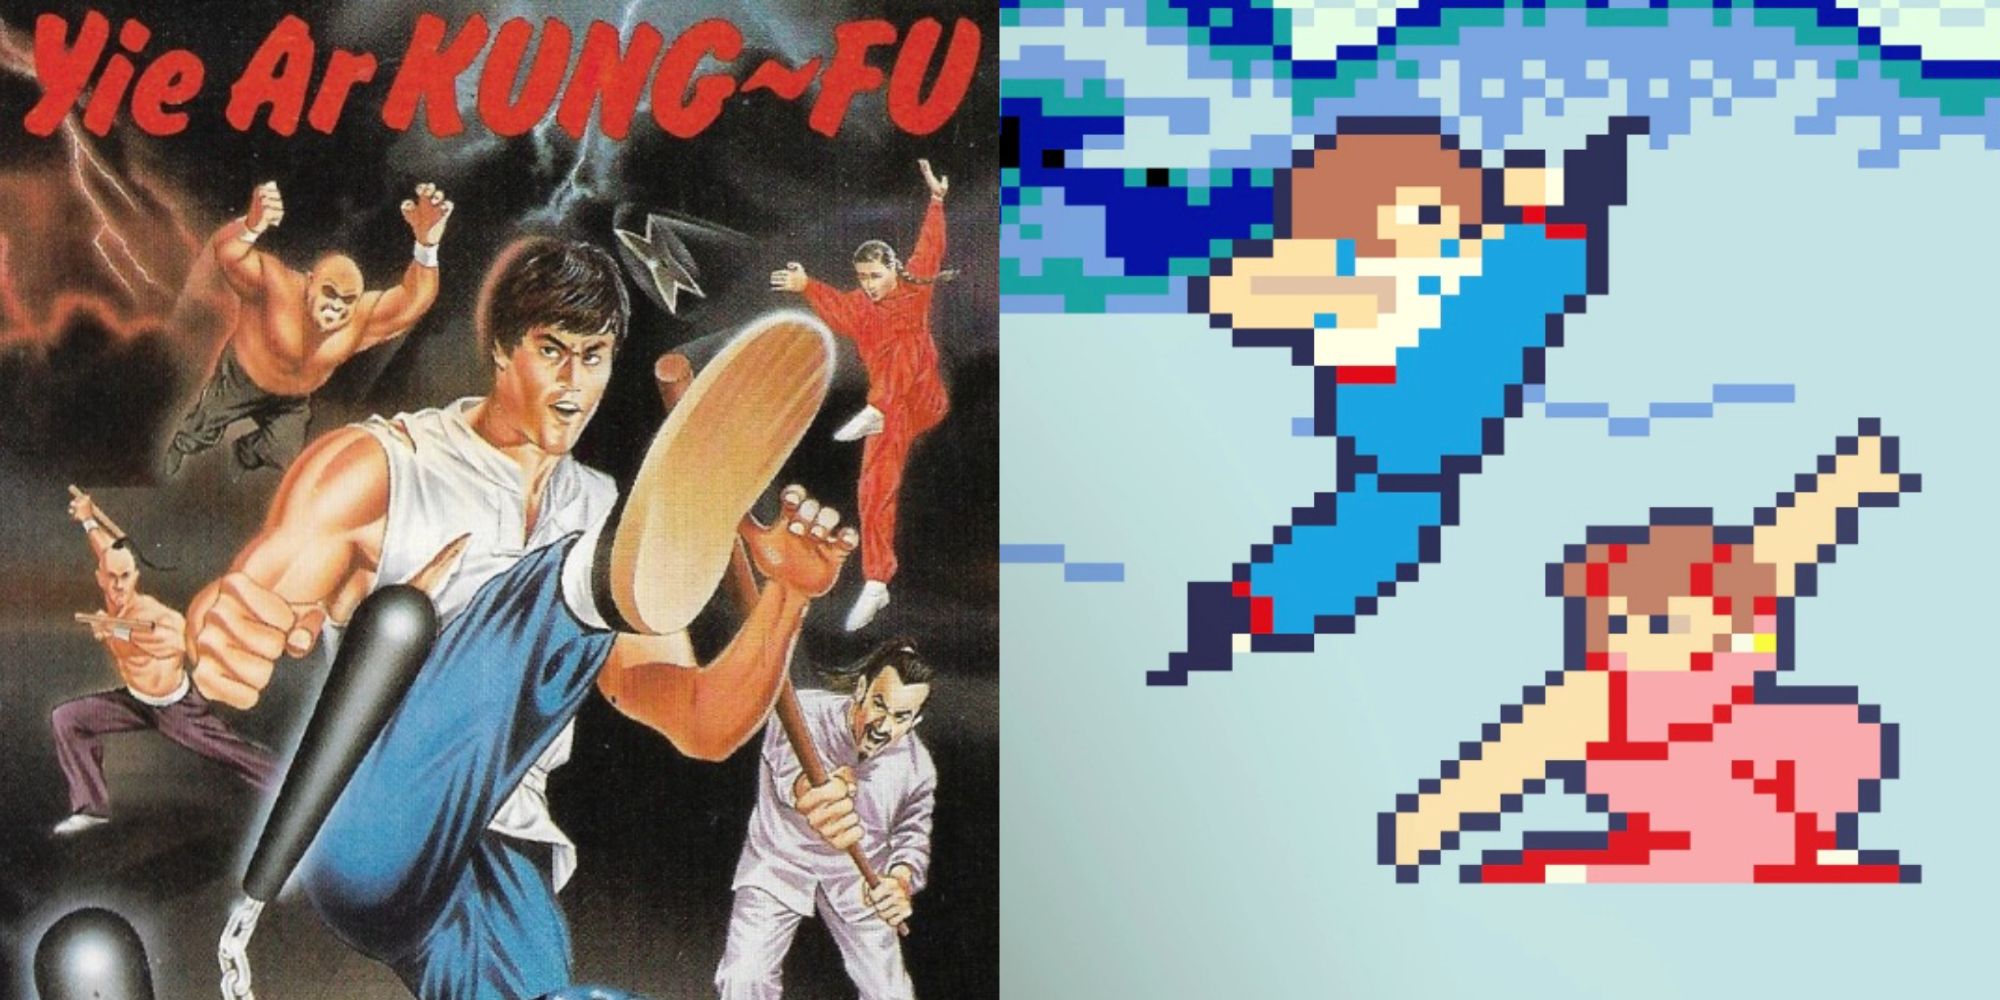 Yie Ar Kung-Fu cover art, Oolong fighting in-game